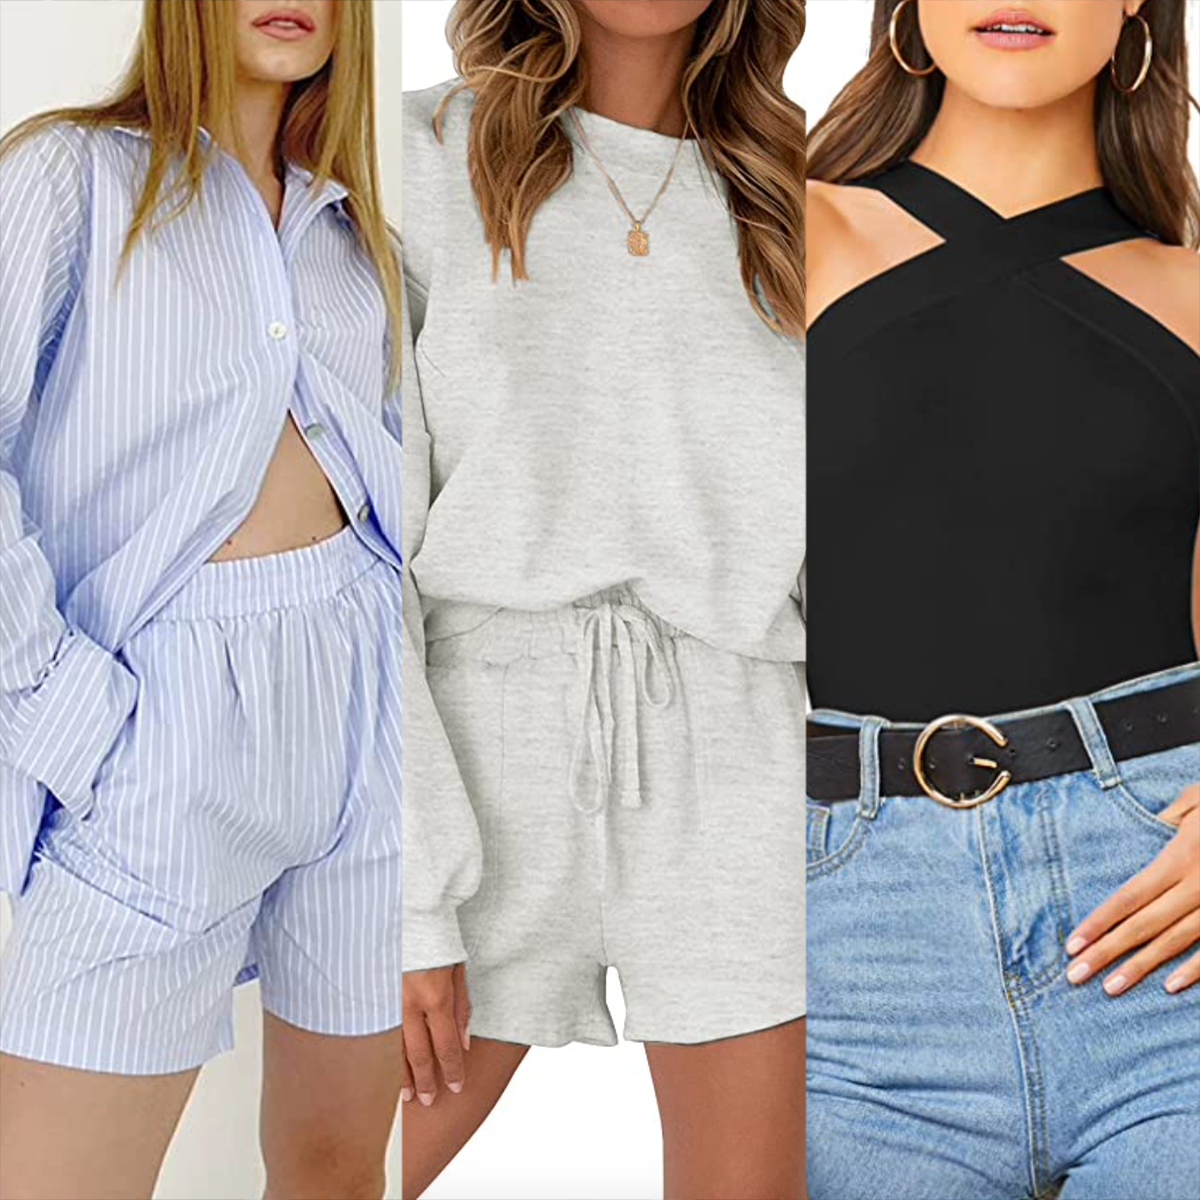 15 Best Aritzia Dupes You Will Love - The Decor Forum